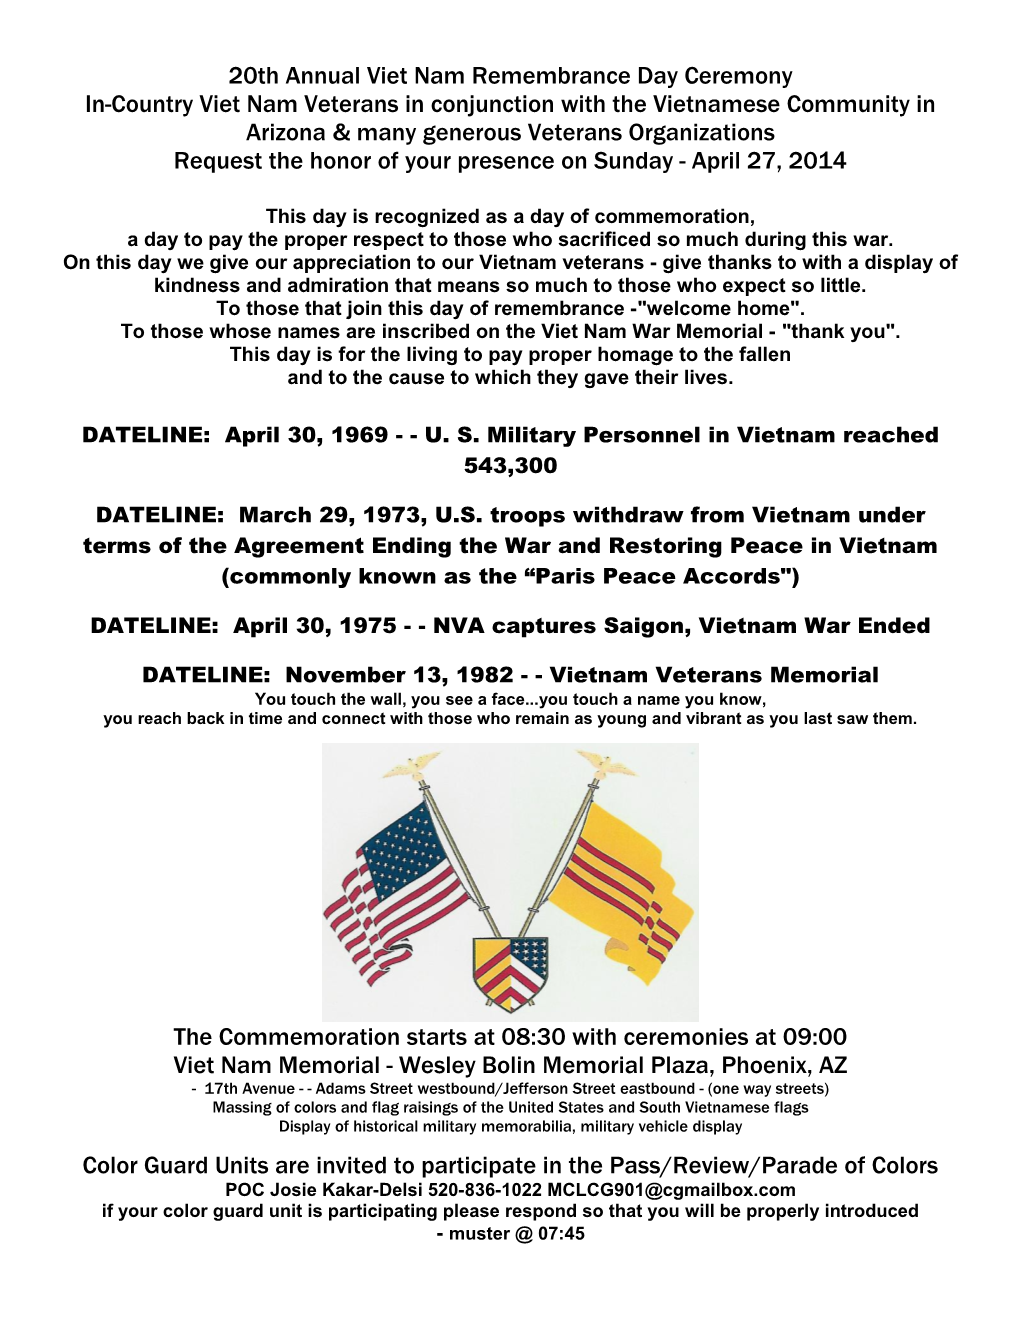 In-Country Viet Nam Veterans in Conjunction With